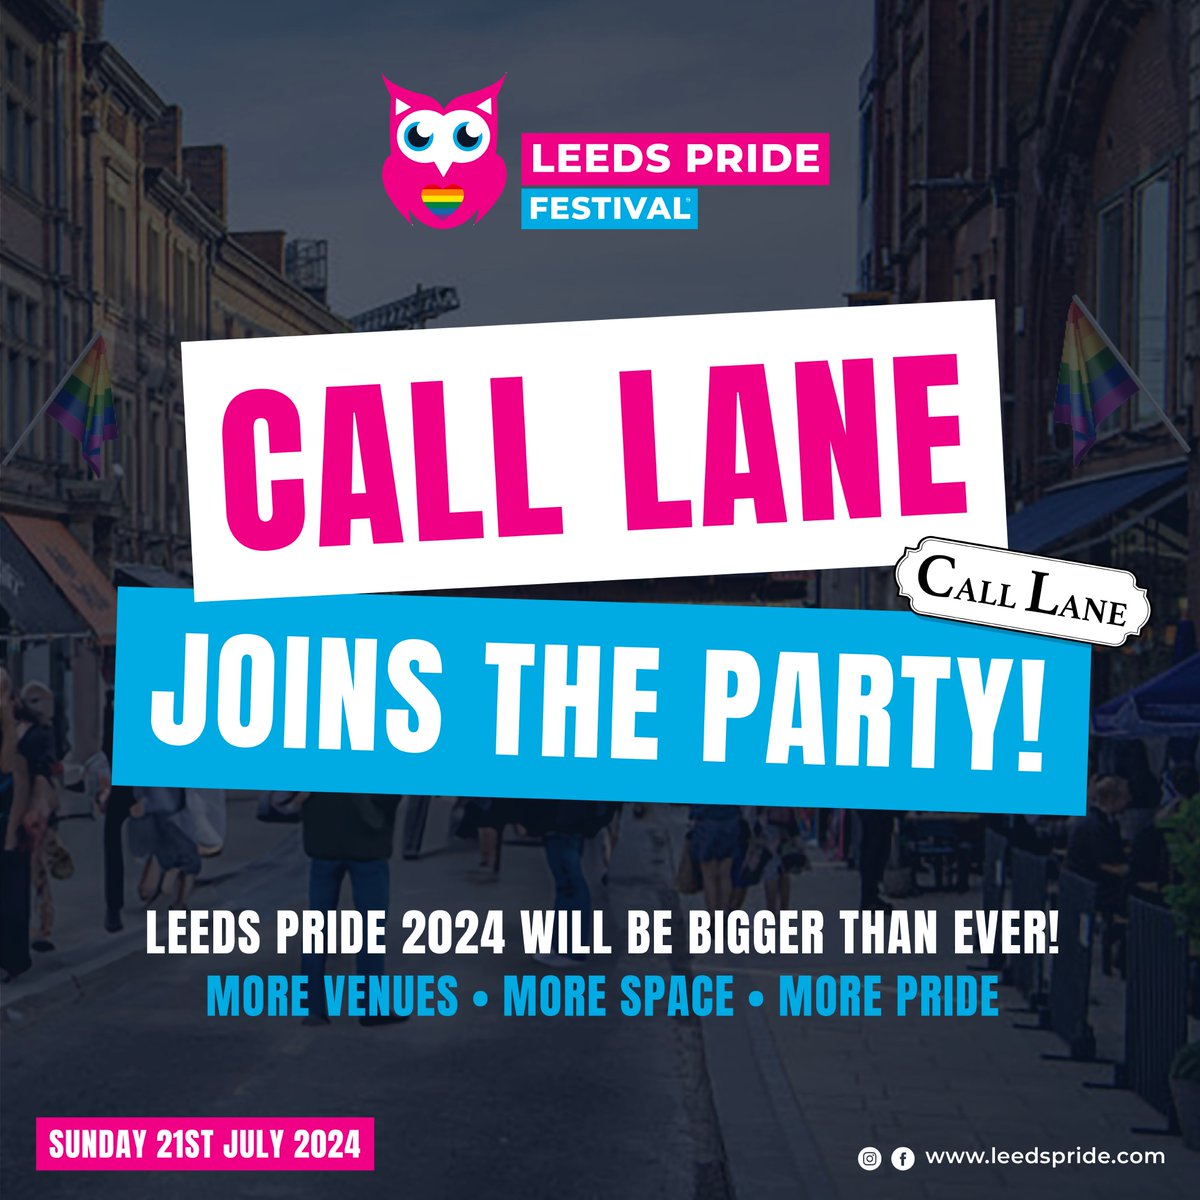 In an exciting development, we can announce that Call Lane will be incorporated into the site plan for the 2024 event!🏳️‍🌈 This expansion promises to provide visitors with more space, additional venues to explore & a fresh dynamic to Yorkshire's BIGGEST LGBTQ+ celebration!🎊